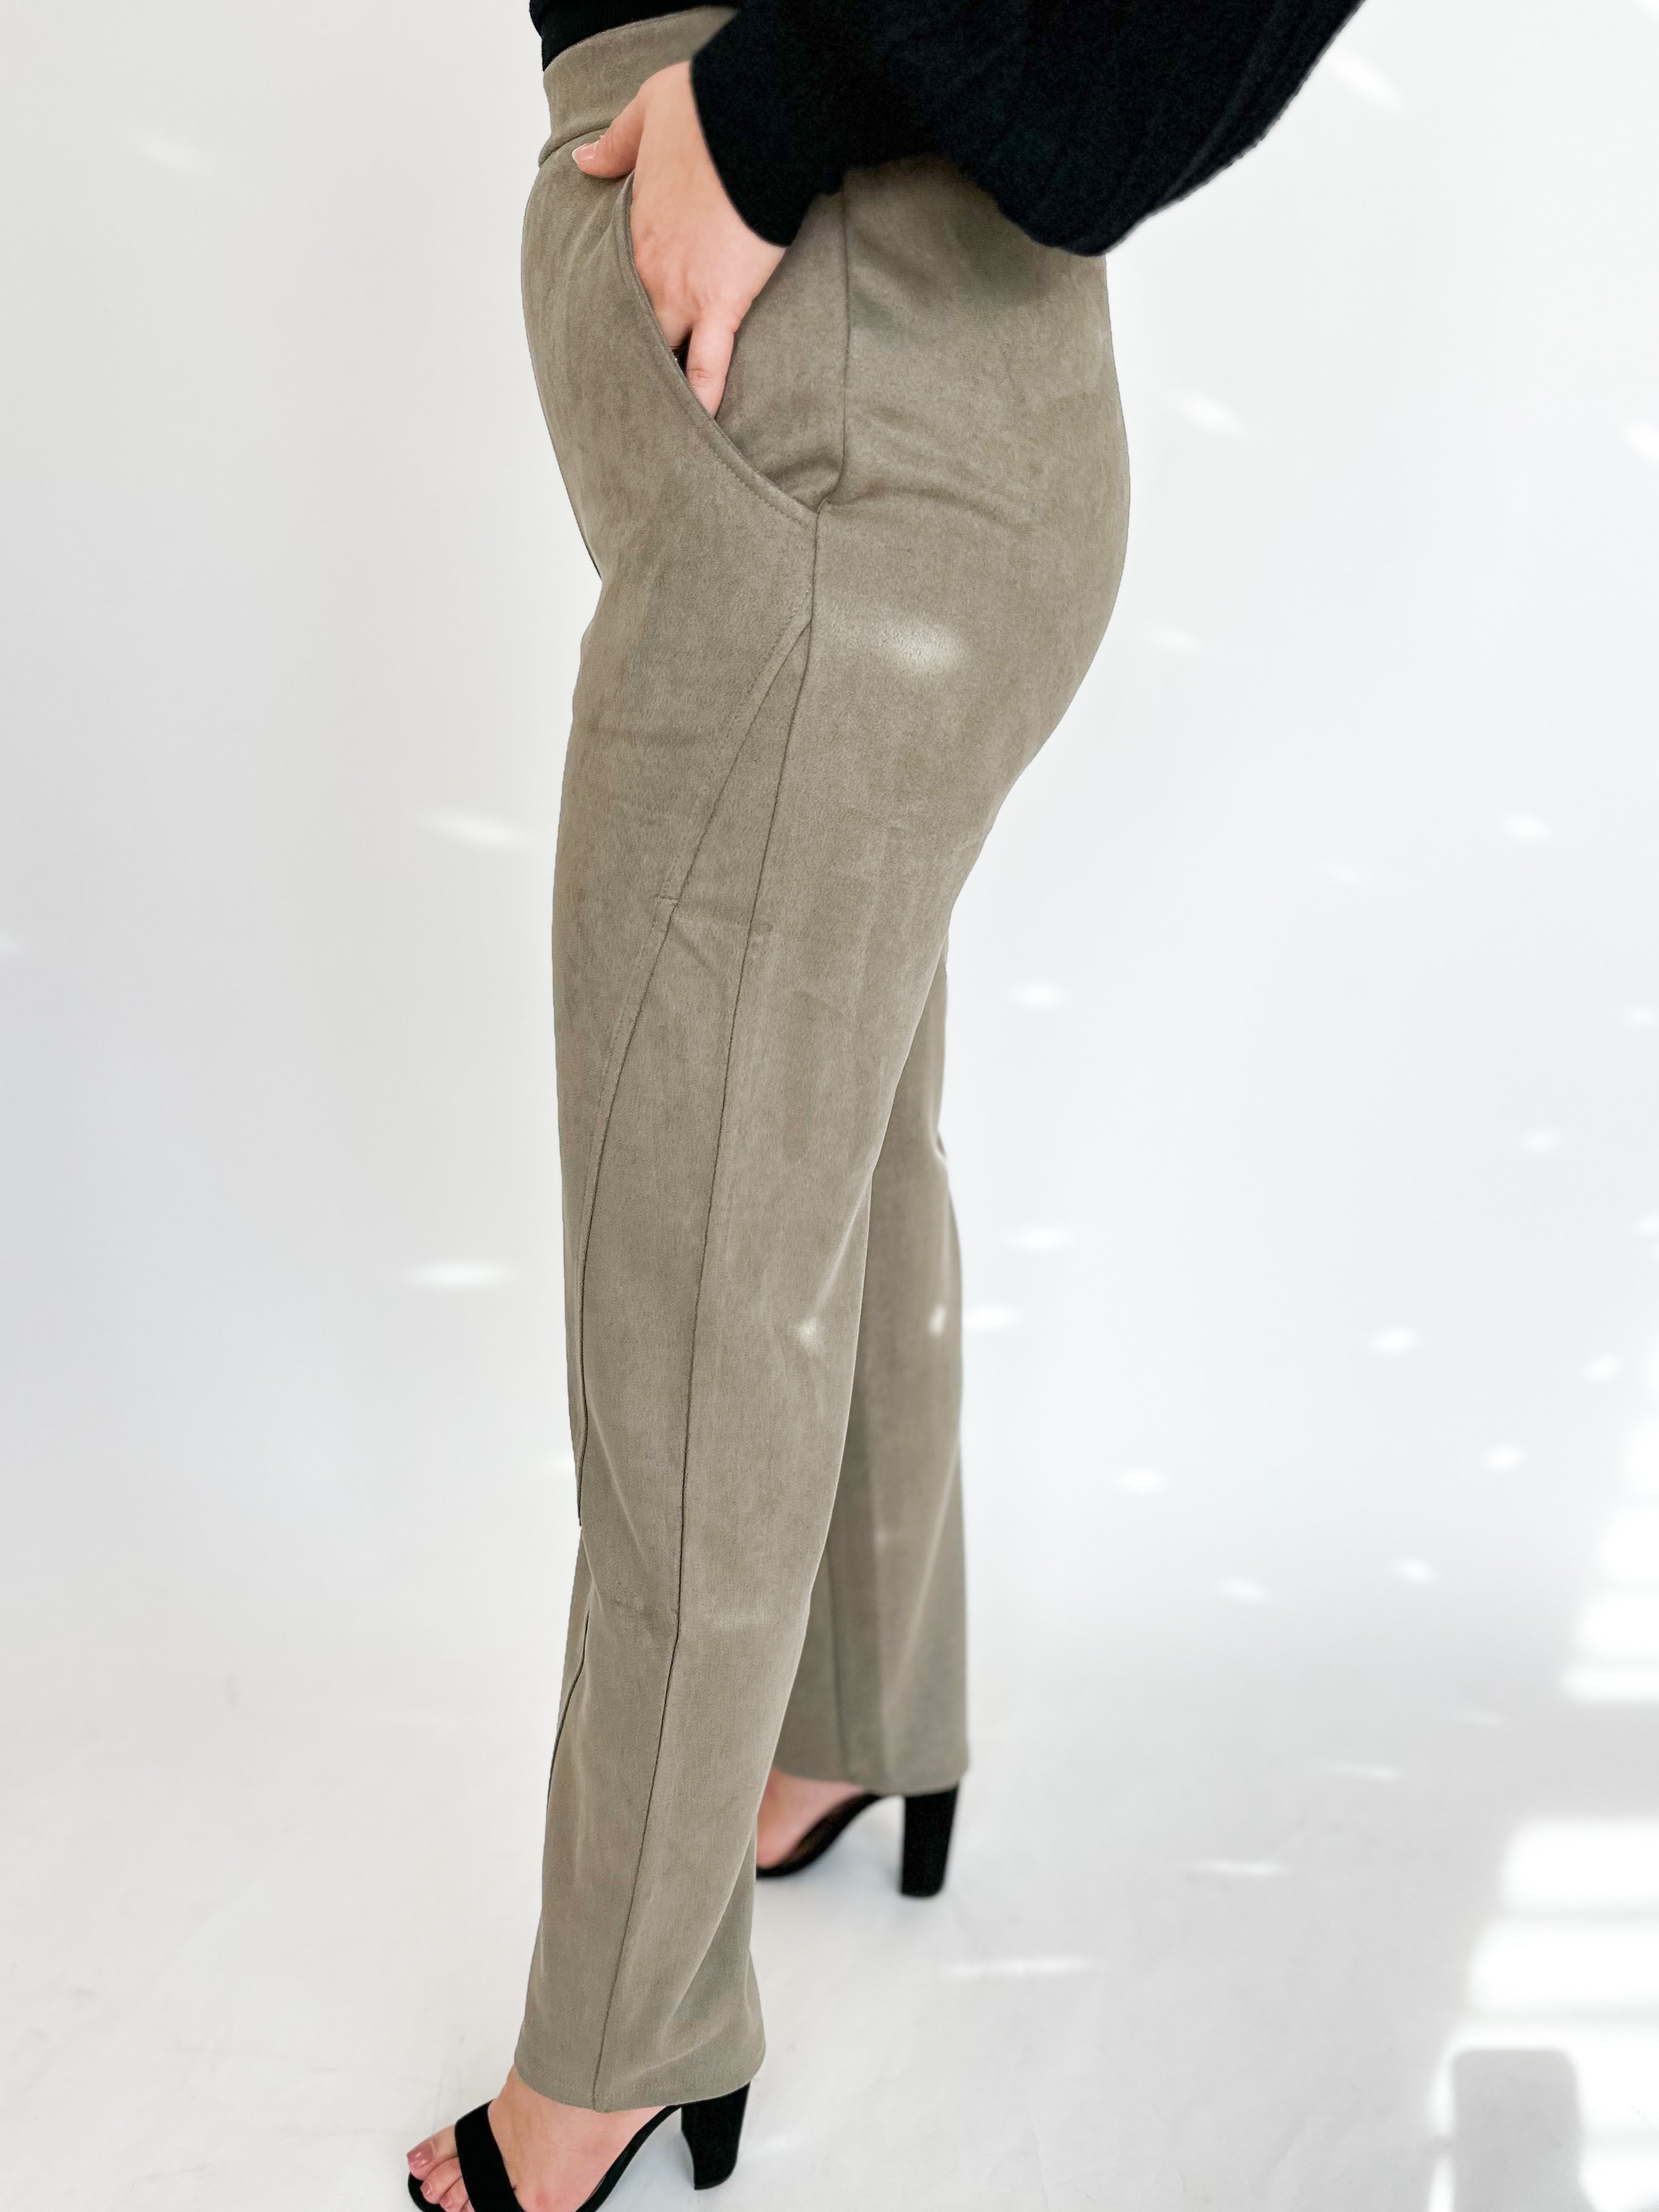 Chic Trousers - Mocha-400 Pants-ALLIE ROSE-July & June Women's Fashion Boutique Located in San Antonio, Texas